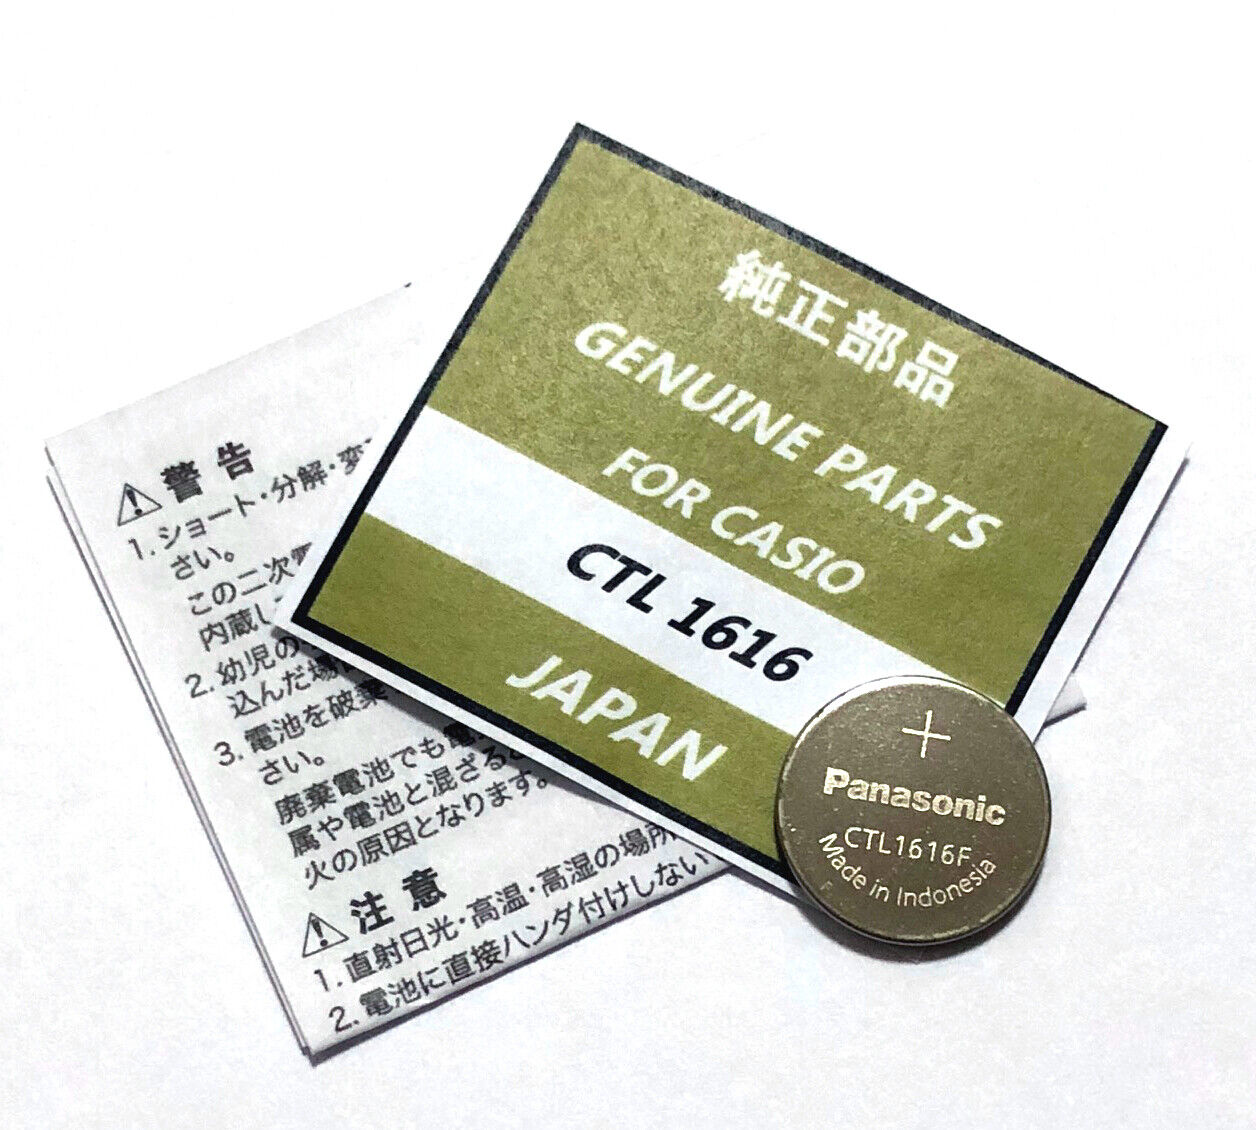 For Casio Panasonic Capacitor solar Battery rechargeable CTL1616 CTL1616F